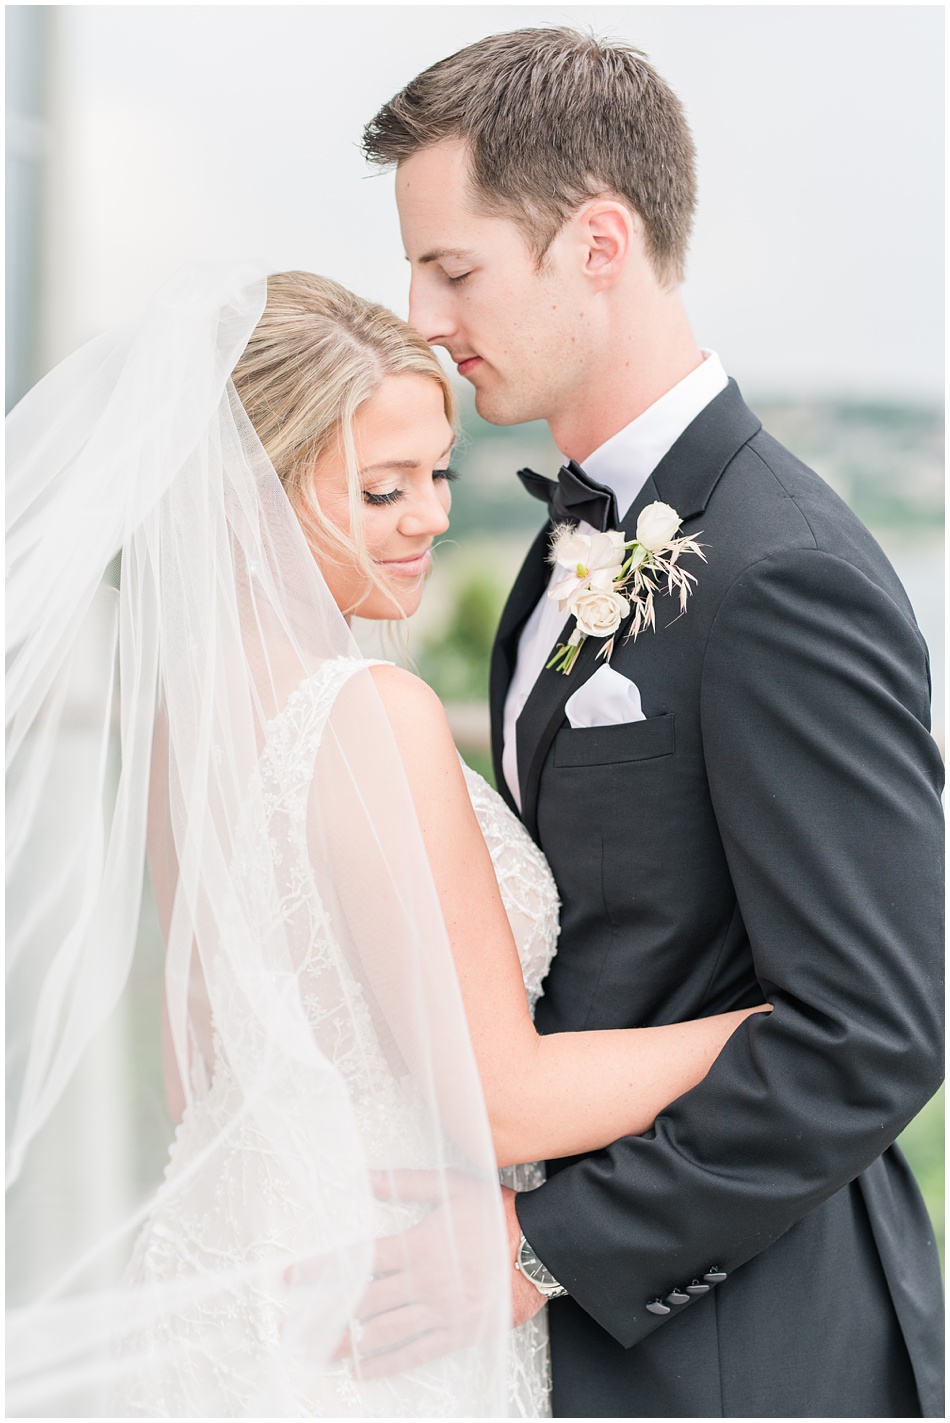 Bride and Groom Portraits at Lakeway Resort and Spa in Austin Texas